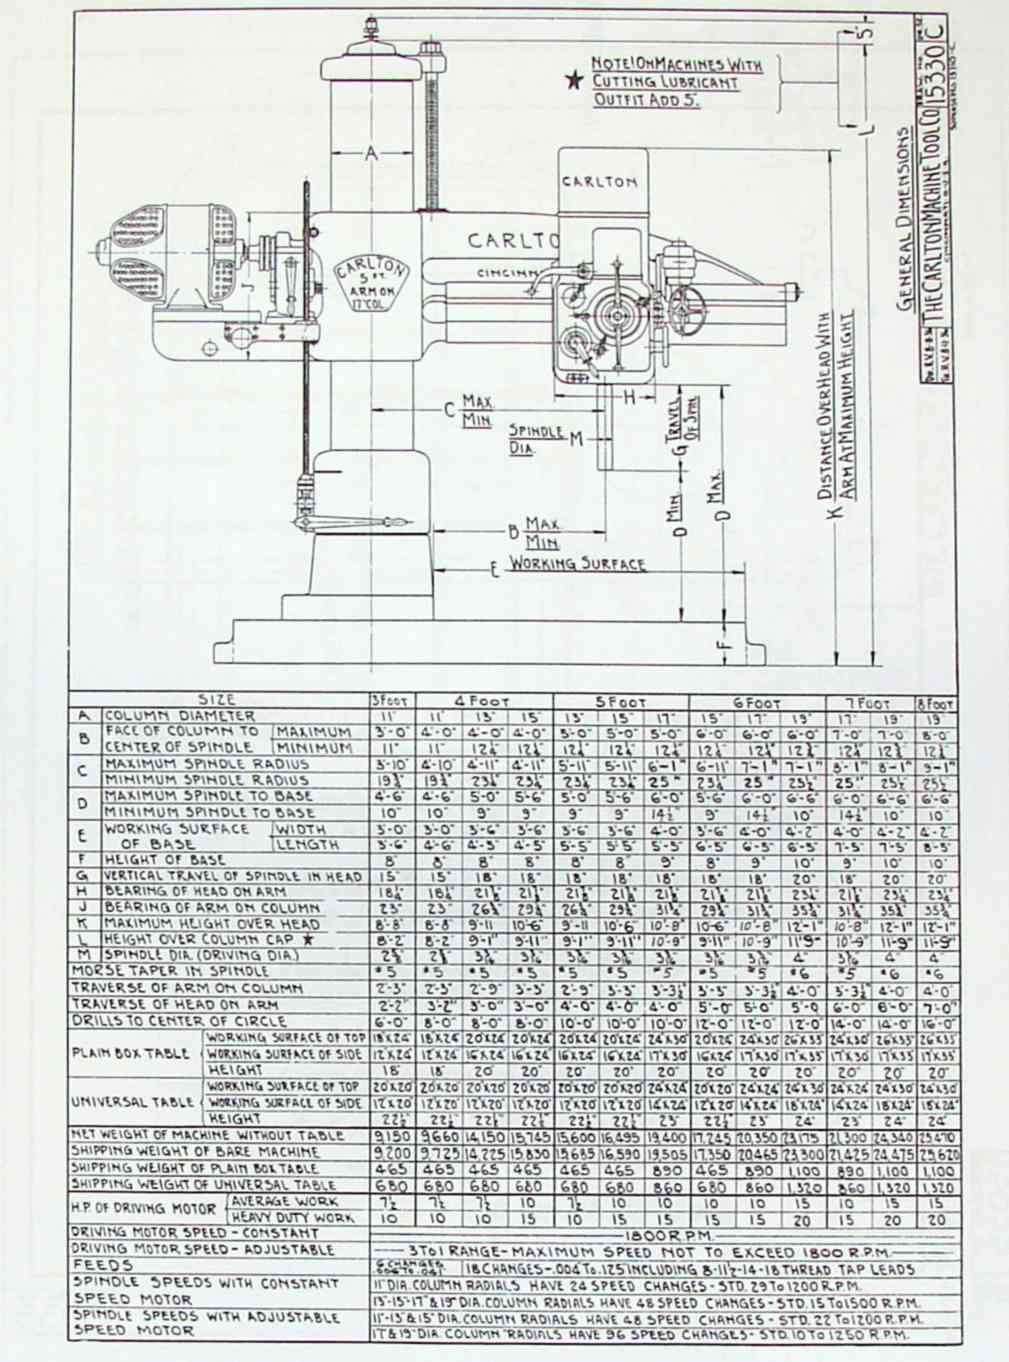 CARLTON 3A & 4A Radial Drill Parts Manual with Columns 11 